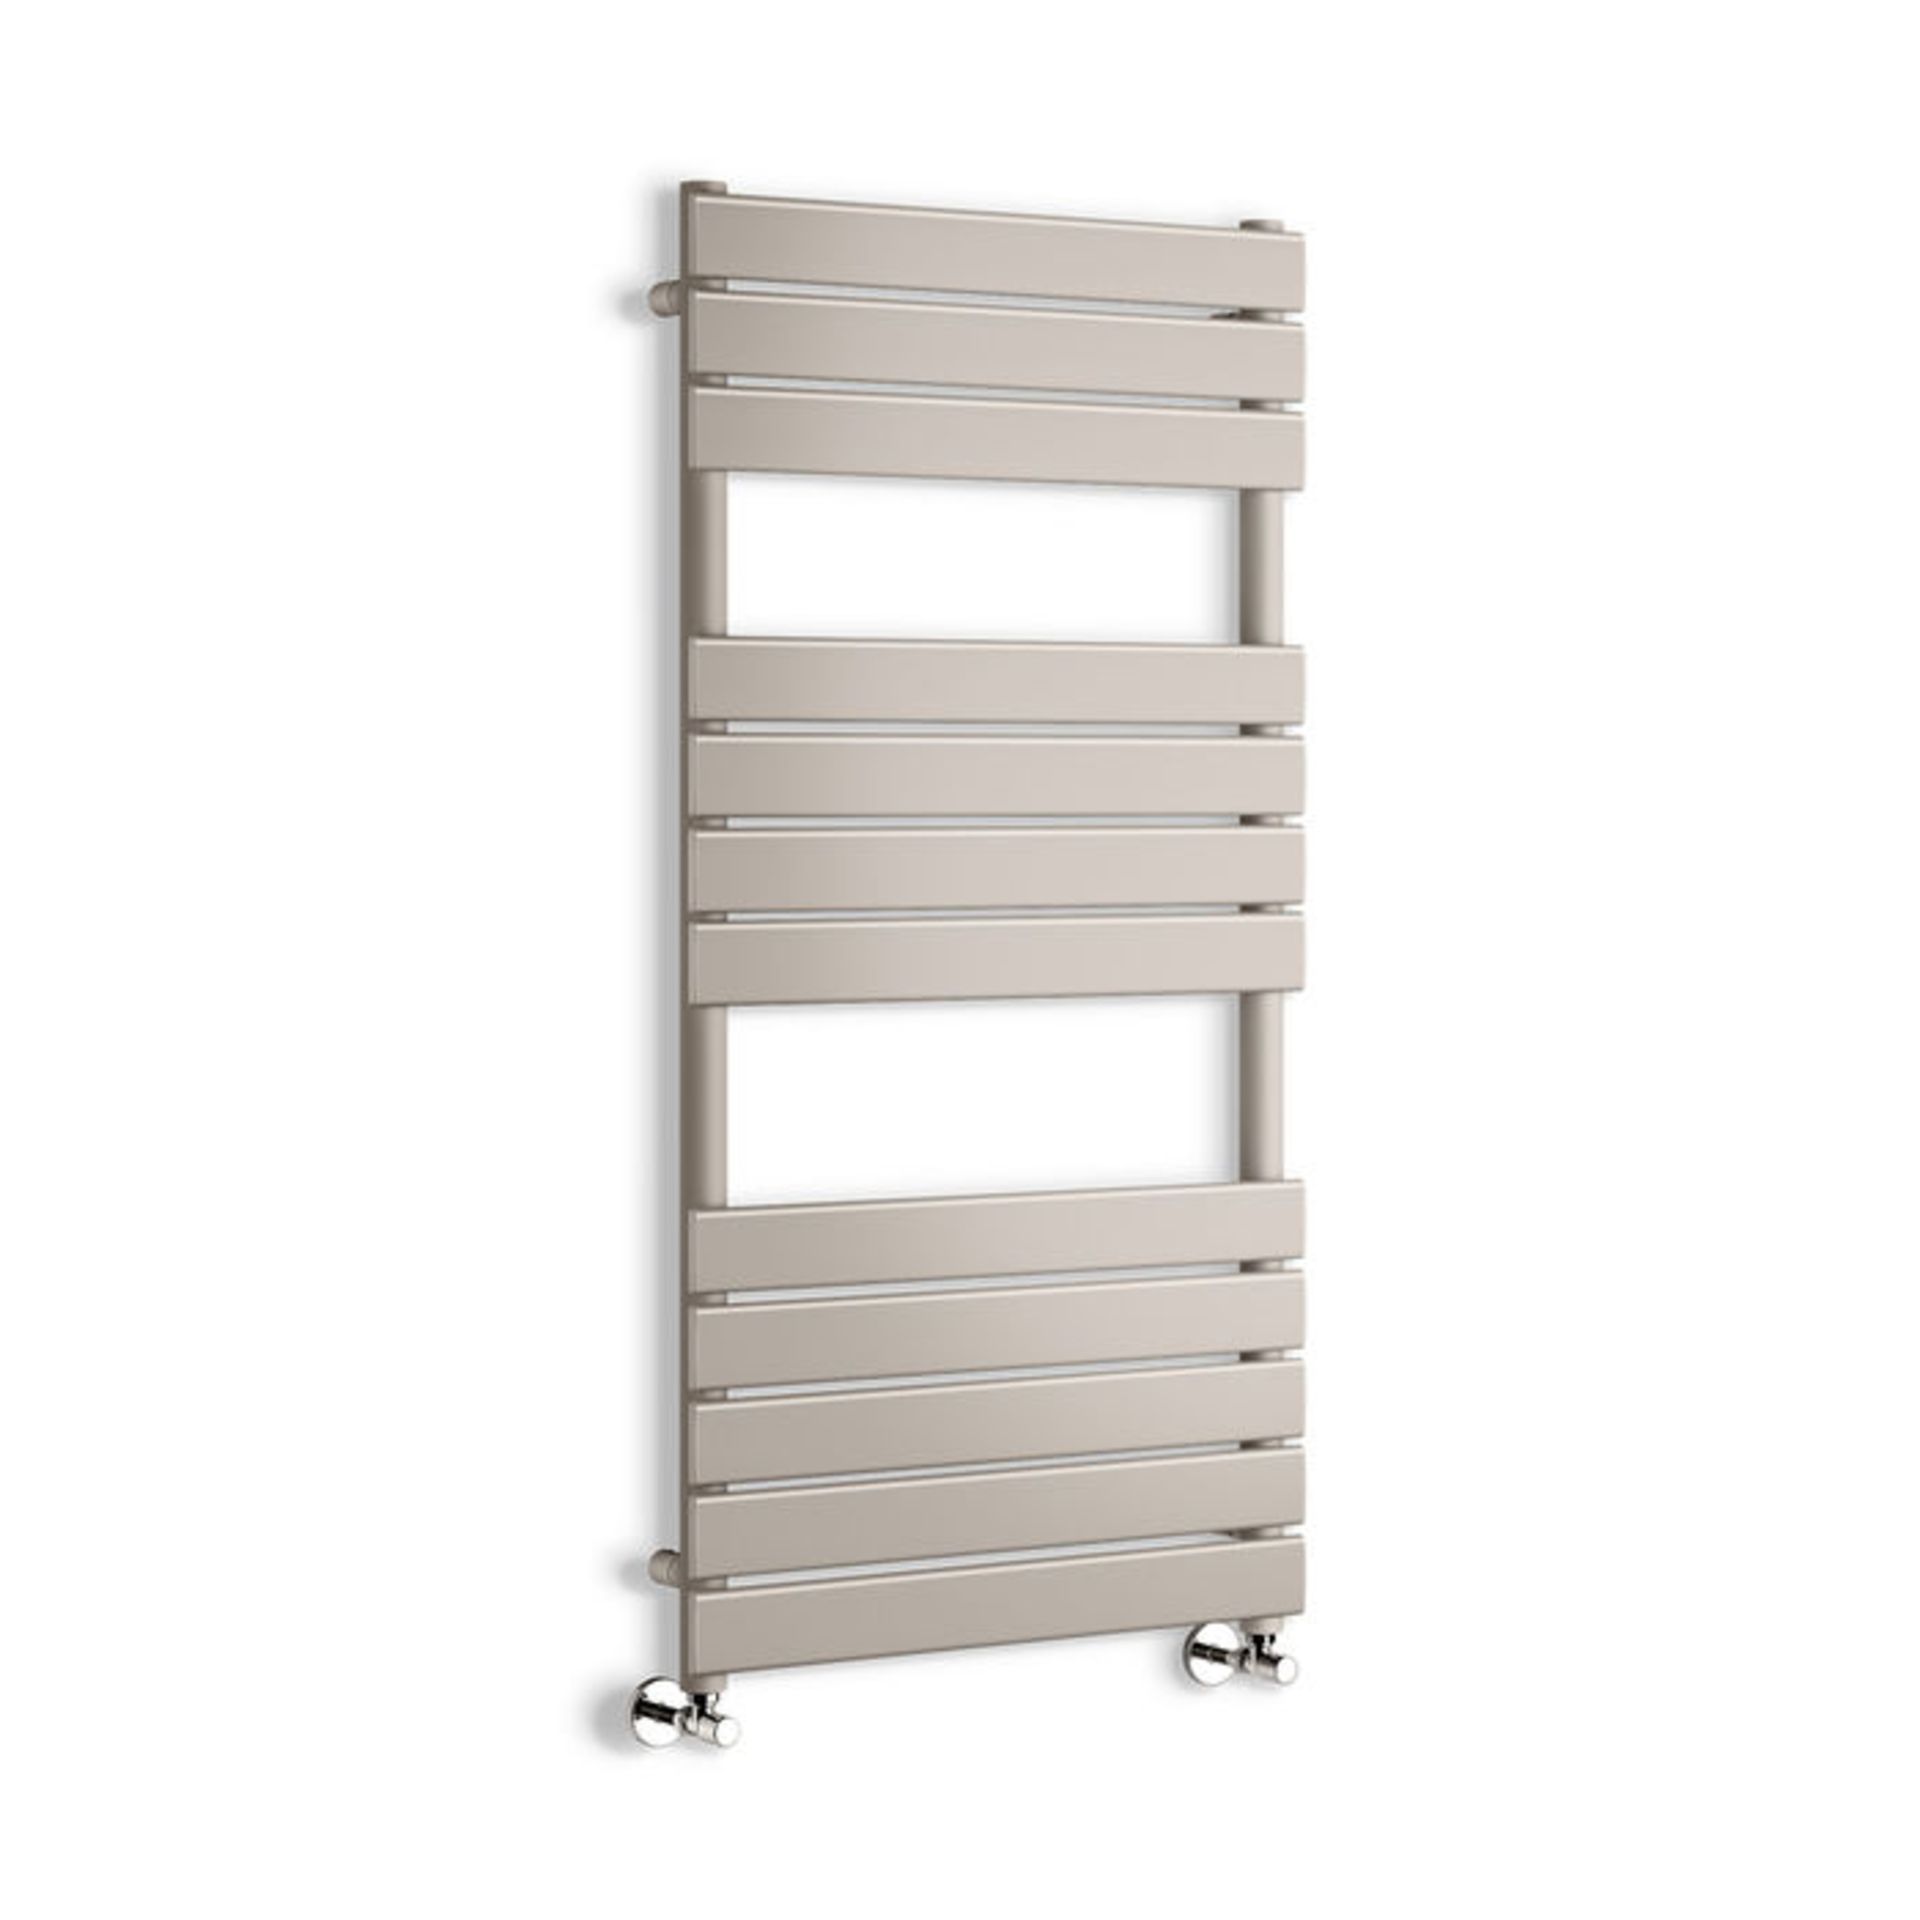 (TS254) 1200x600mm Latte Flat Panel Ladder Towel Radiator. Made from high quality low carbon - Image 3 of 3